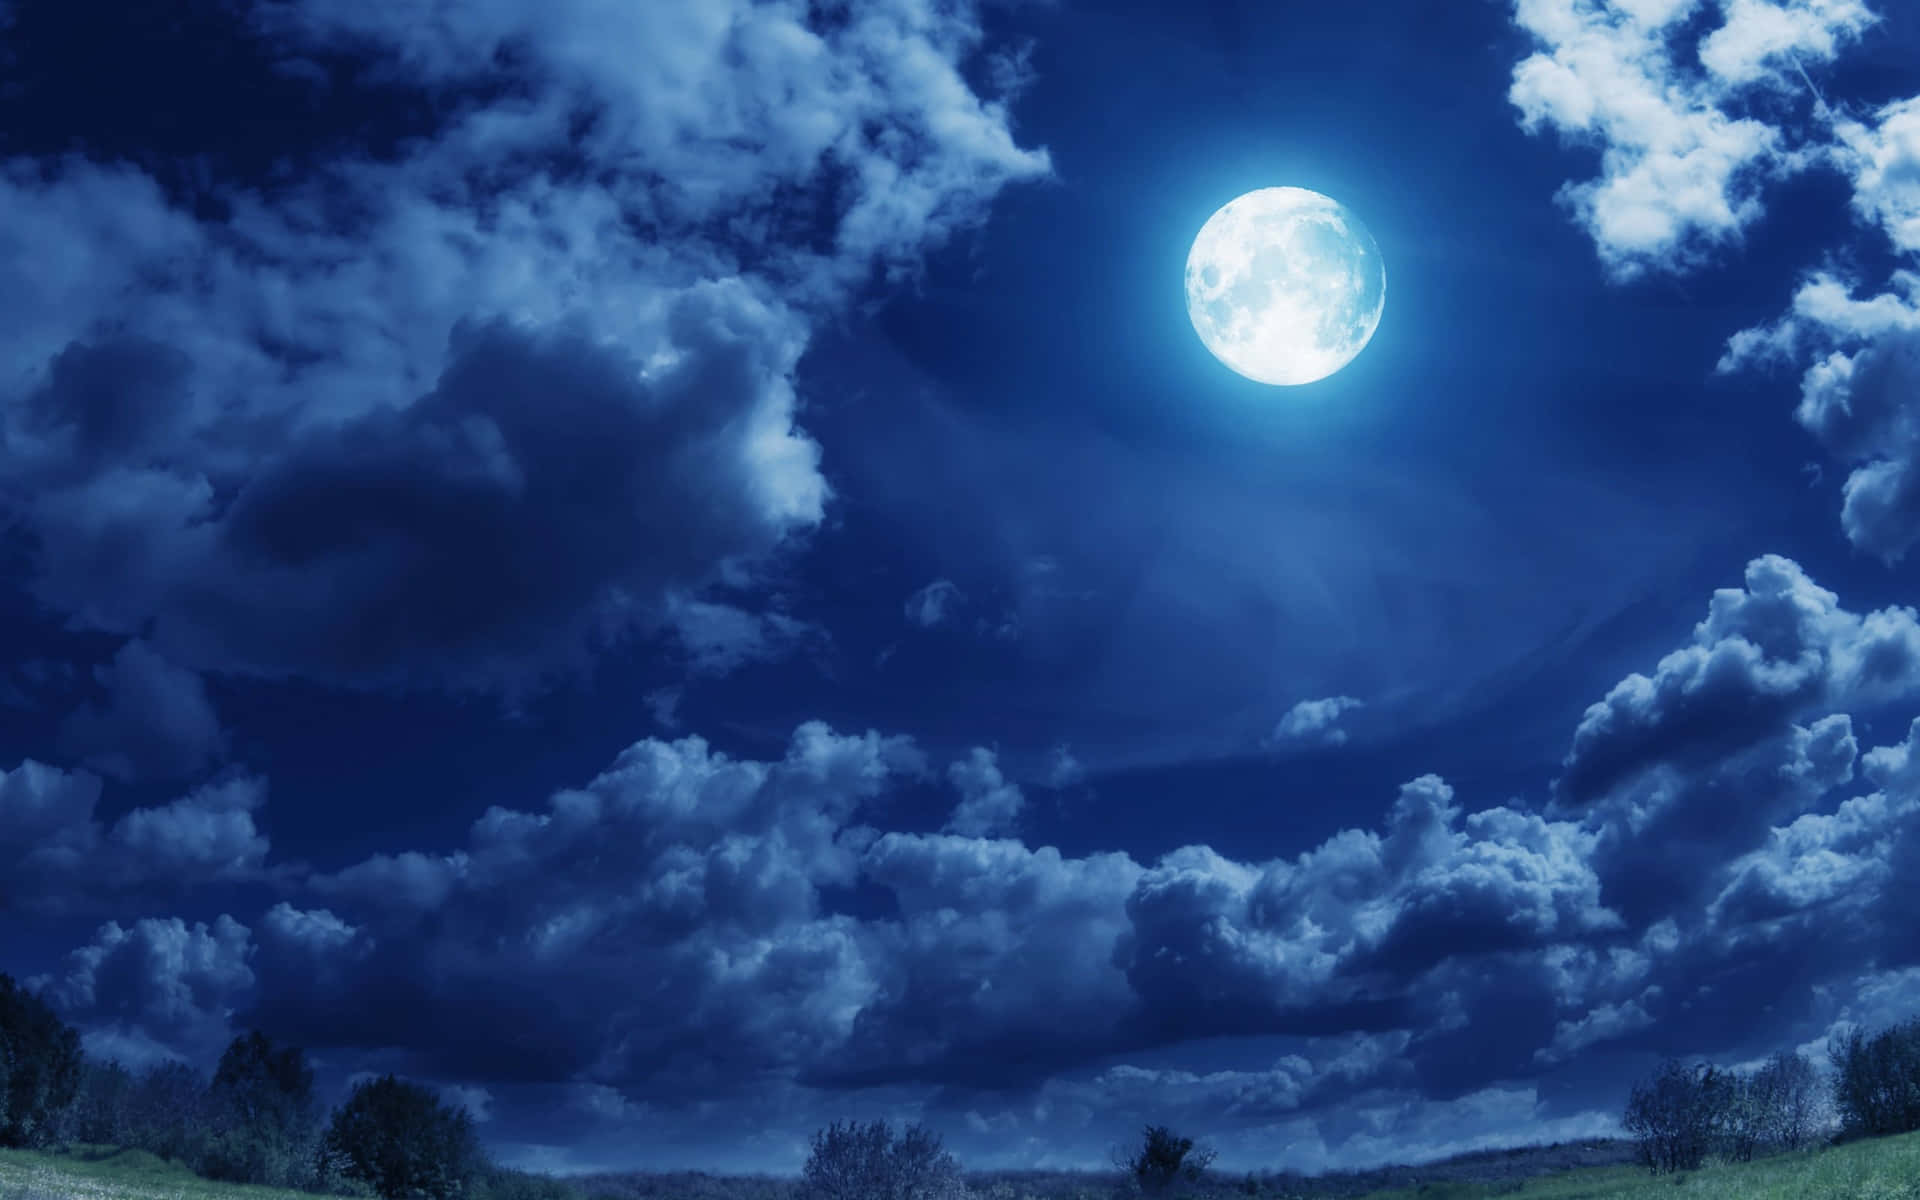 Phone Wallpaper Night Moon Over The Clouds + Wallpapers Download 2023